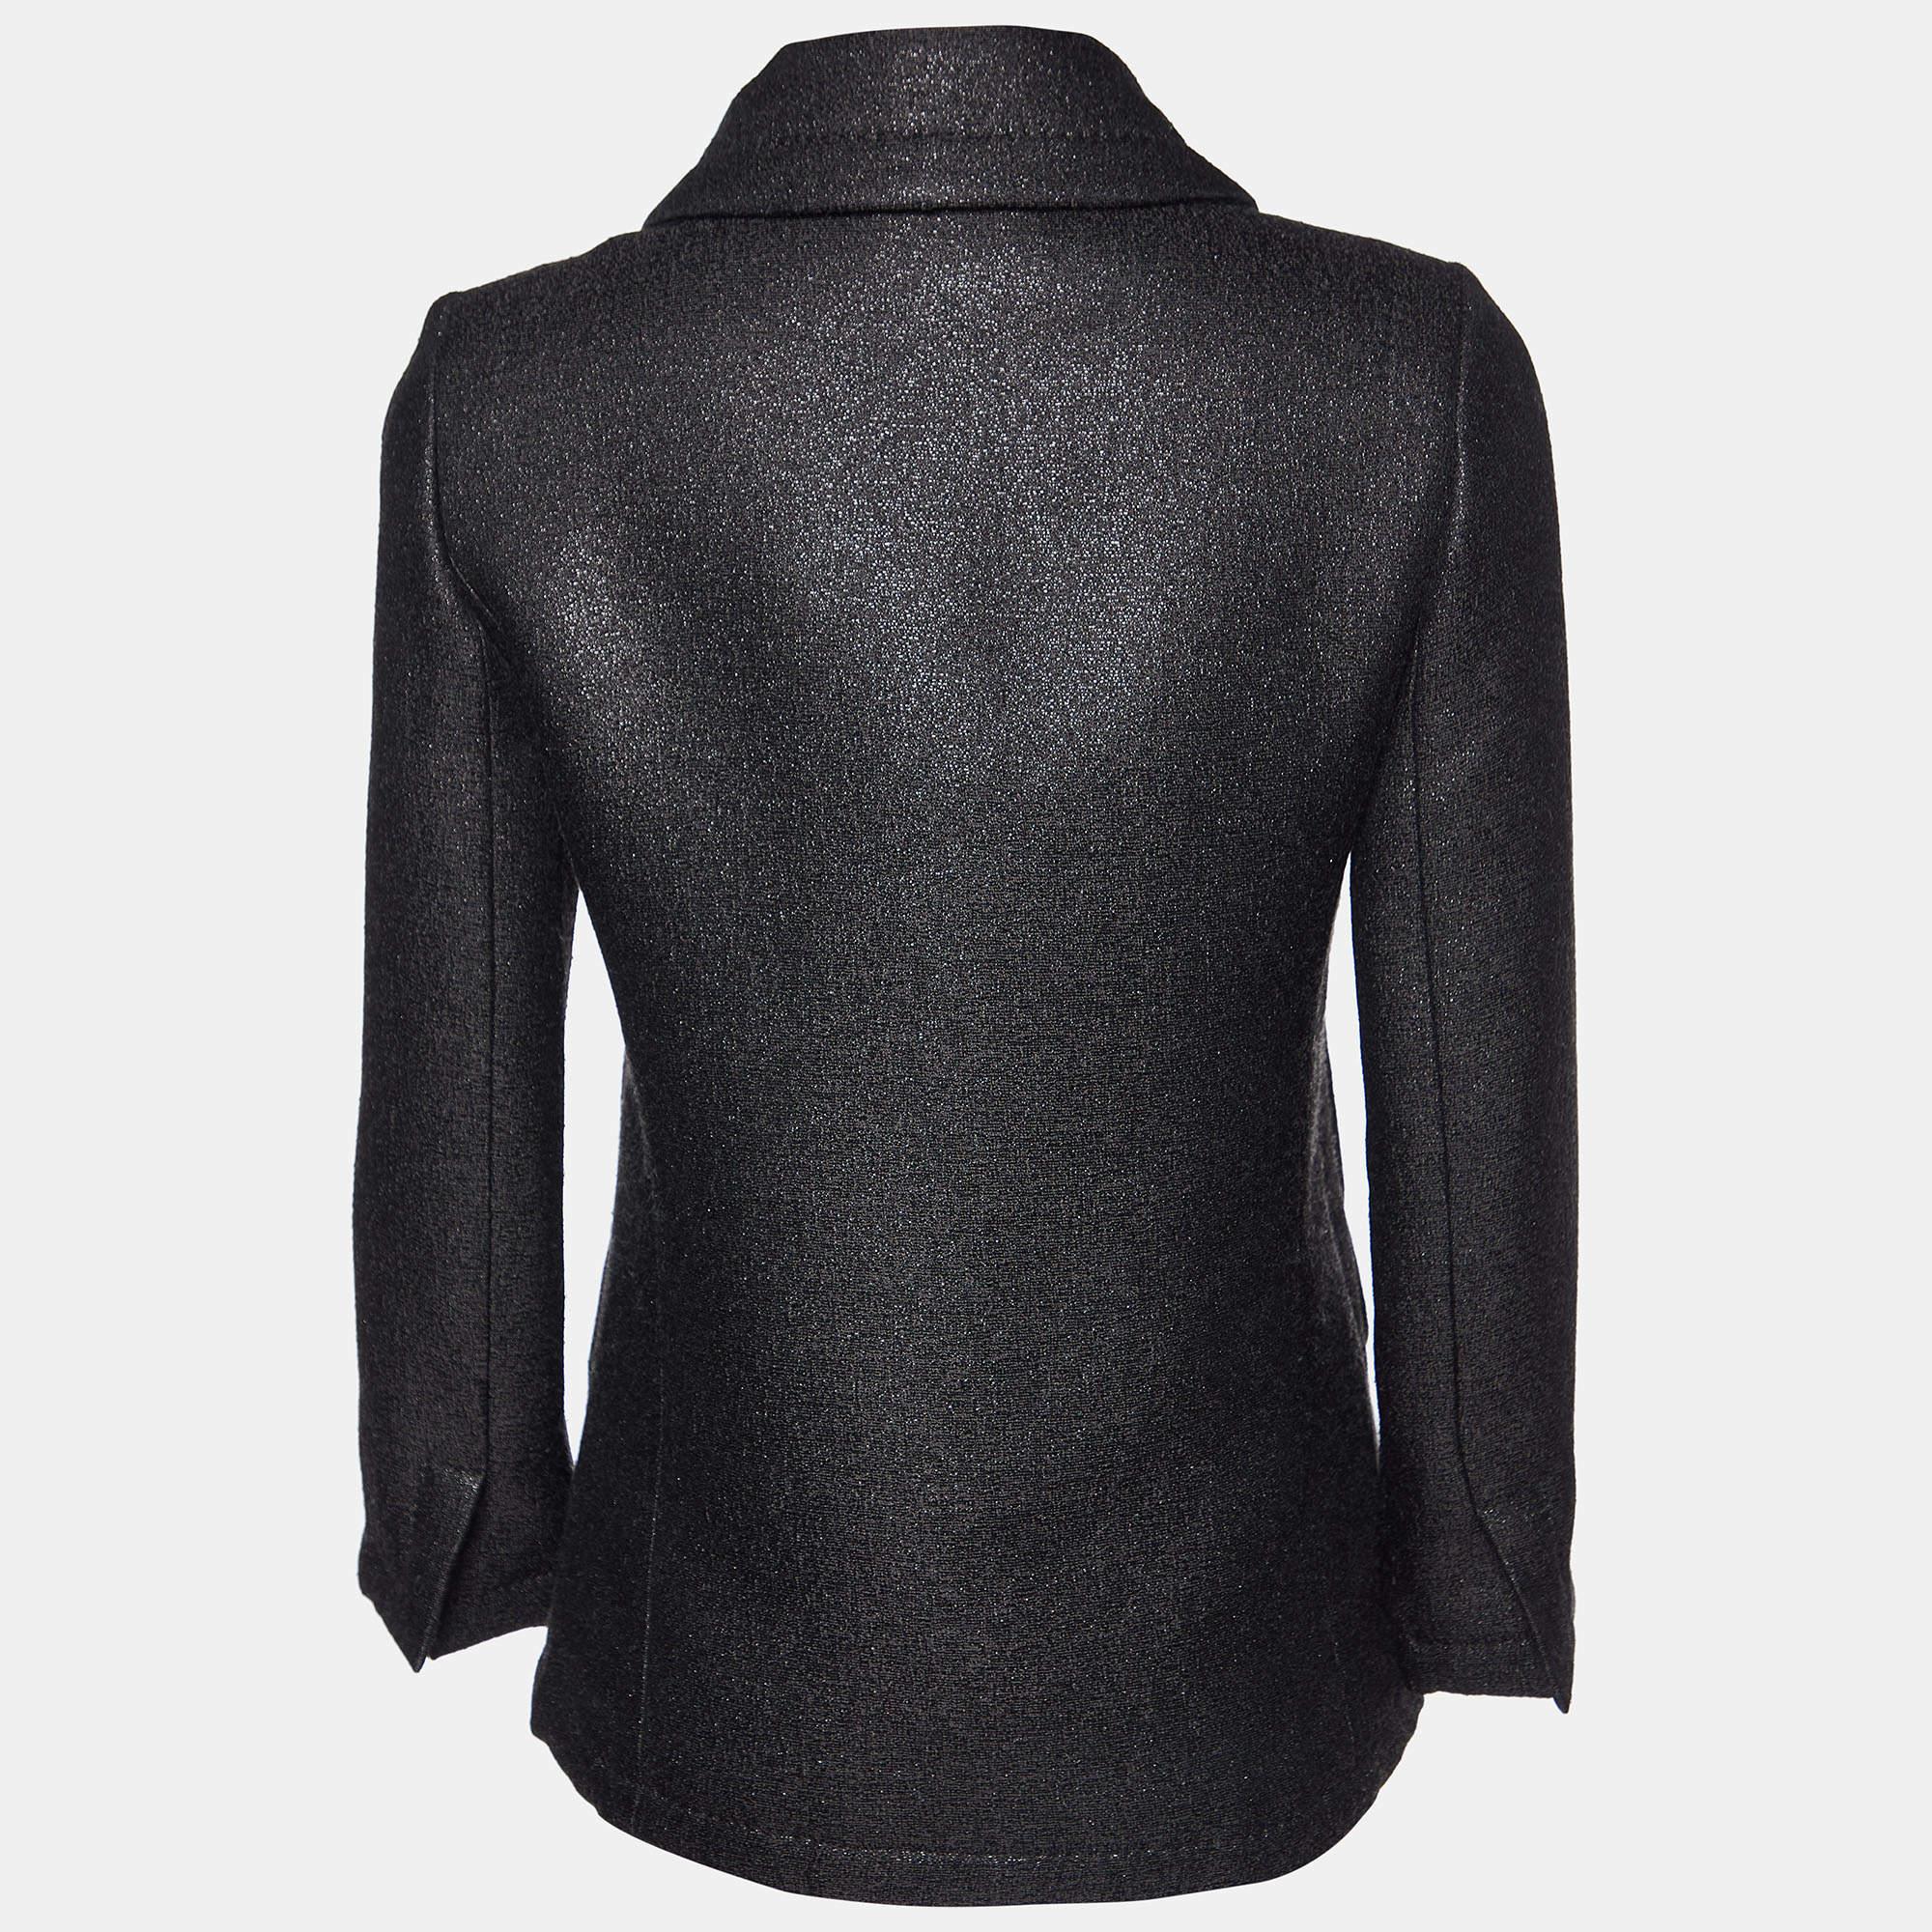 Wrap yourself in timeless elegance with the Louis Vuitton pea coat. Crafted with meticulous attention to detail, this luxurious outerwear piece exudes sophistication and refinement. Its lustrous black lurex wool fabric offers both warmth and style,